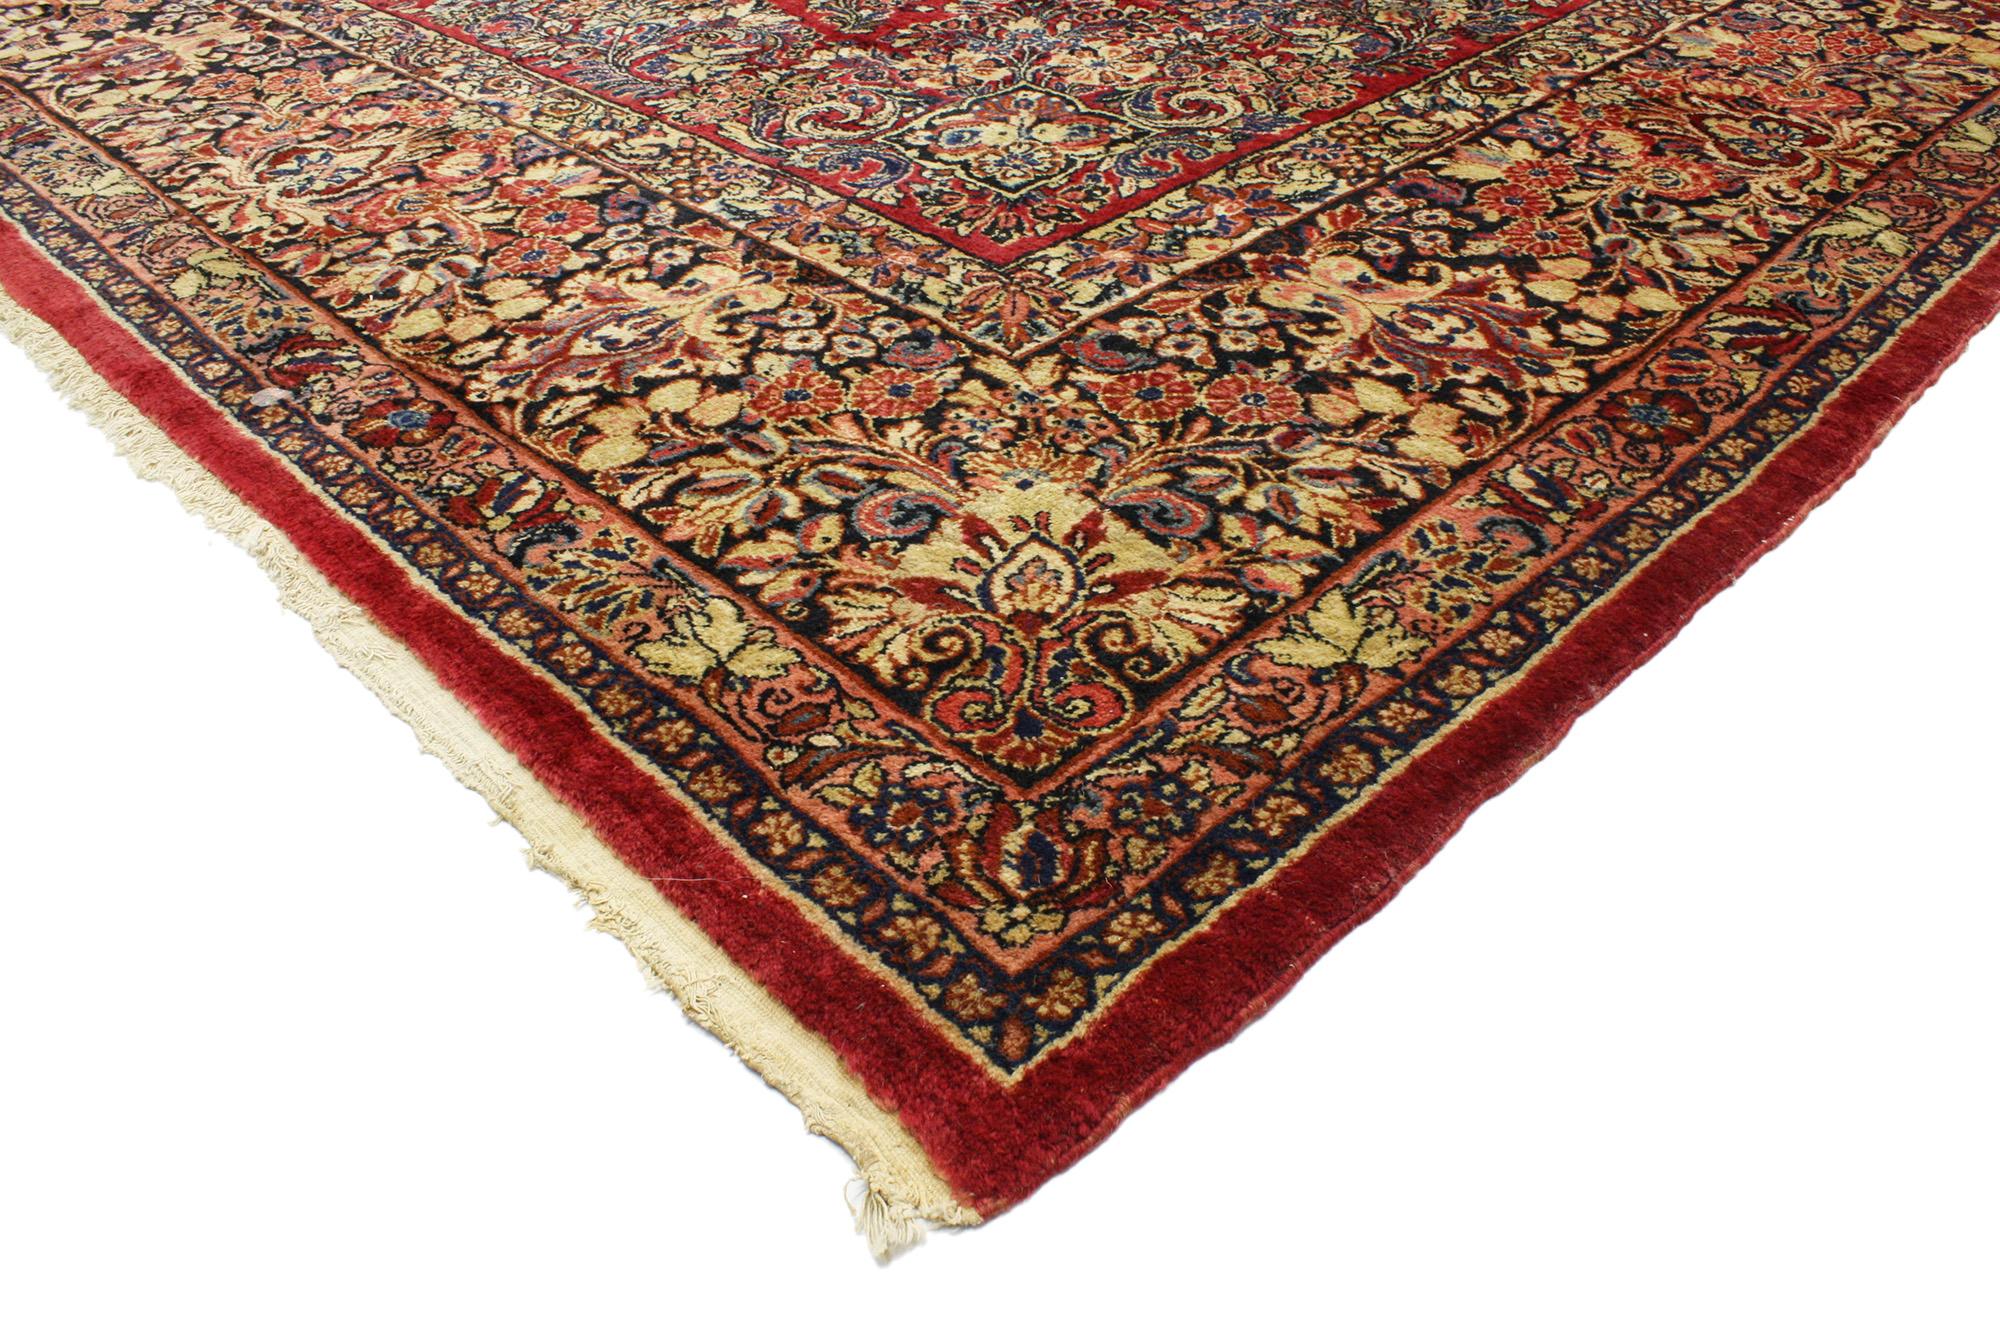 74960 Antique Persian Sarouk Rug with Victorian Style 10'03 x 17'10. With timeless floral design and a traditional color palette, this hand knotted wool antique Persian Sarouk rug is a captivating vision of woven beauty. The abrashed ruby red field